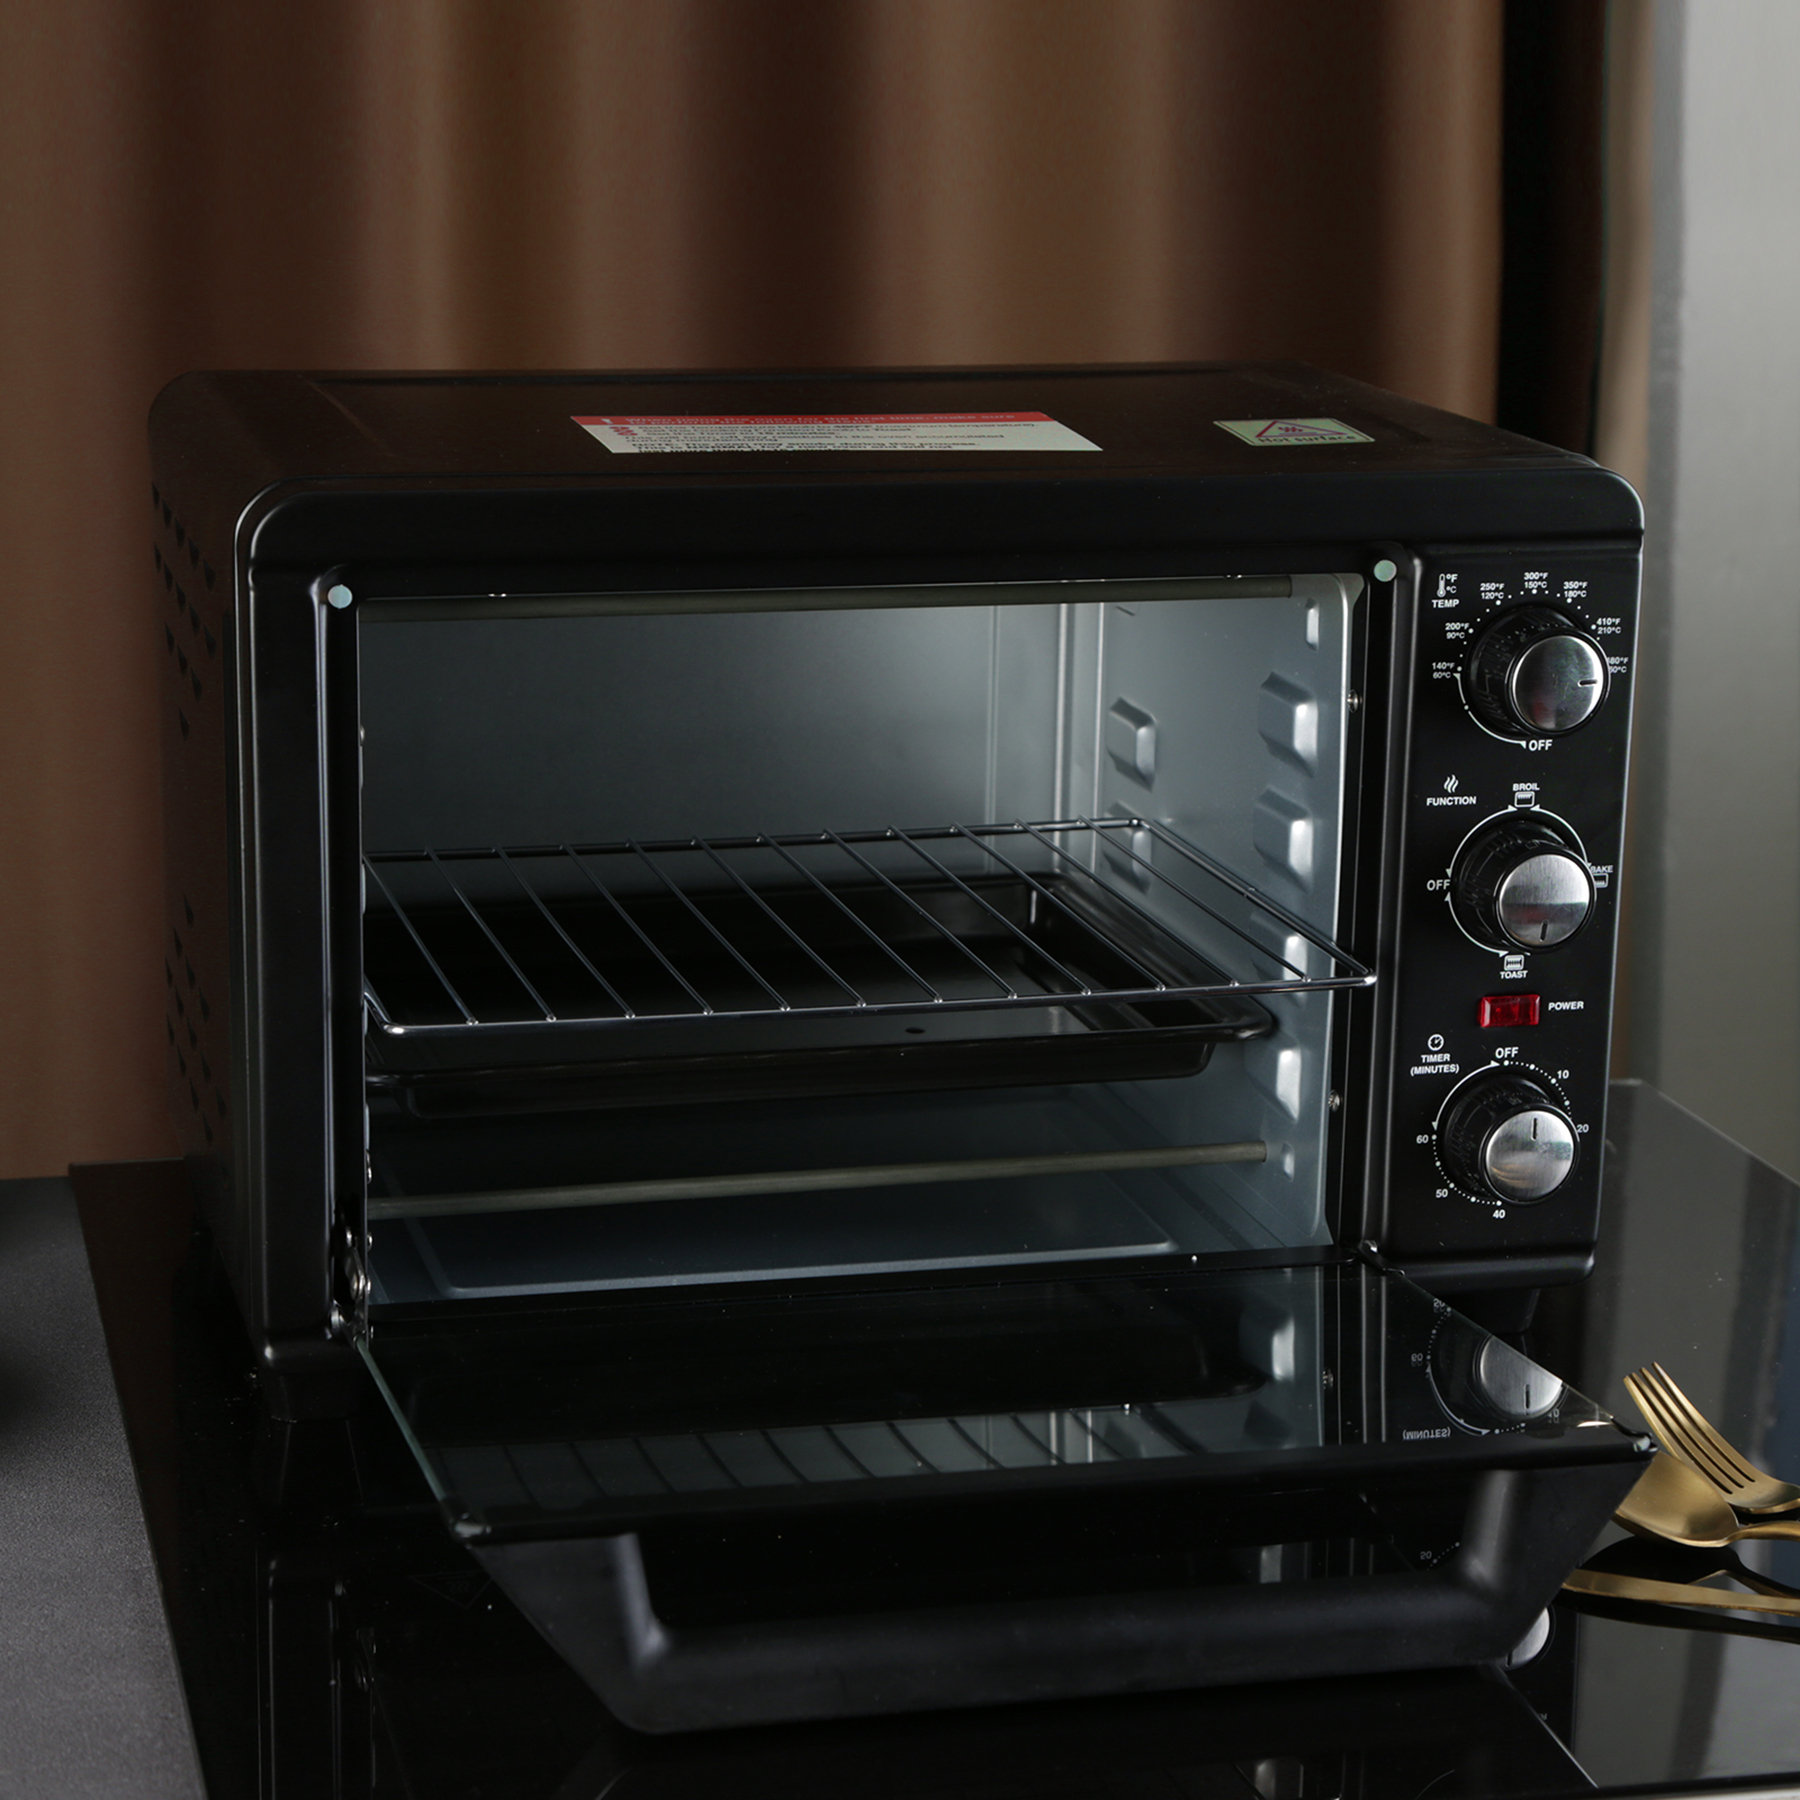 Courant Compact Toaster Oven Black